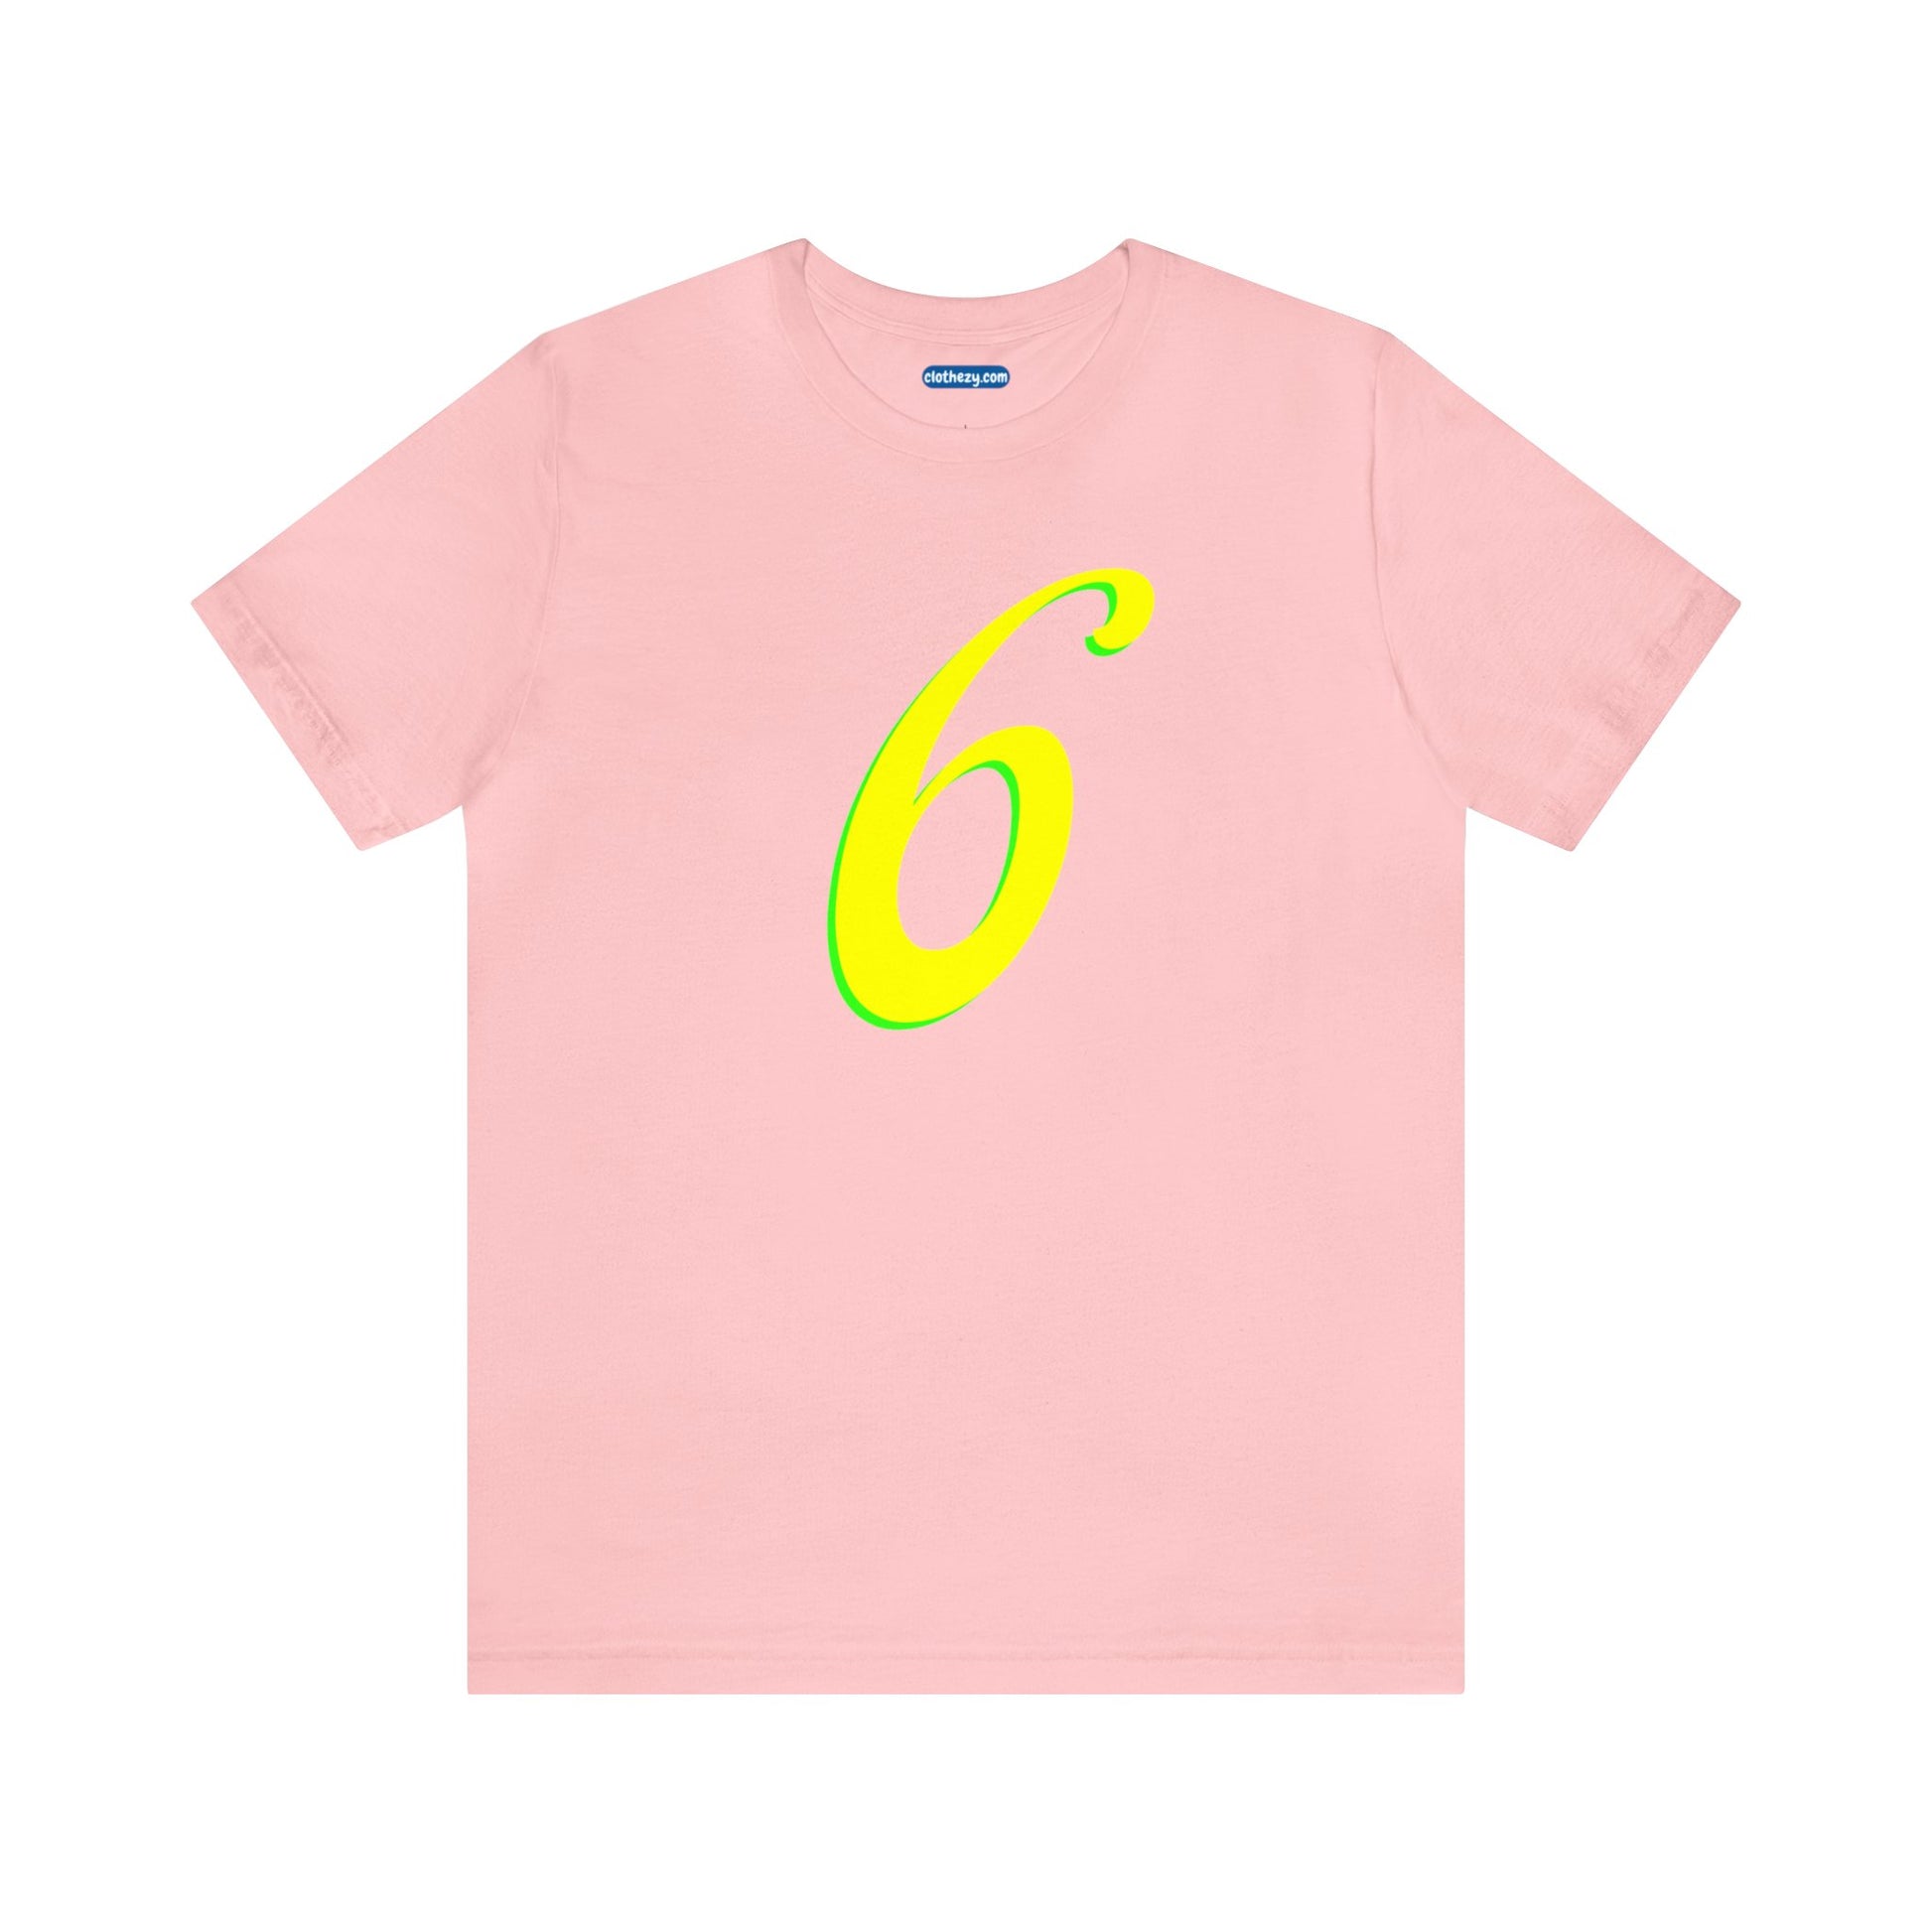 Number 6 Design - Soft Cotton Tee for birthdays and celebrations, Gift for friends and family, Multiple Options by clothezy.com in Red Size Small - Buy Now